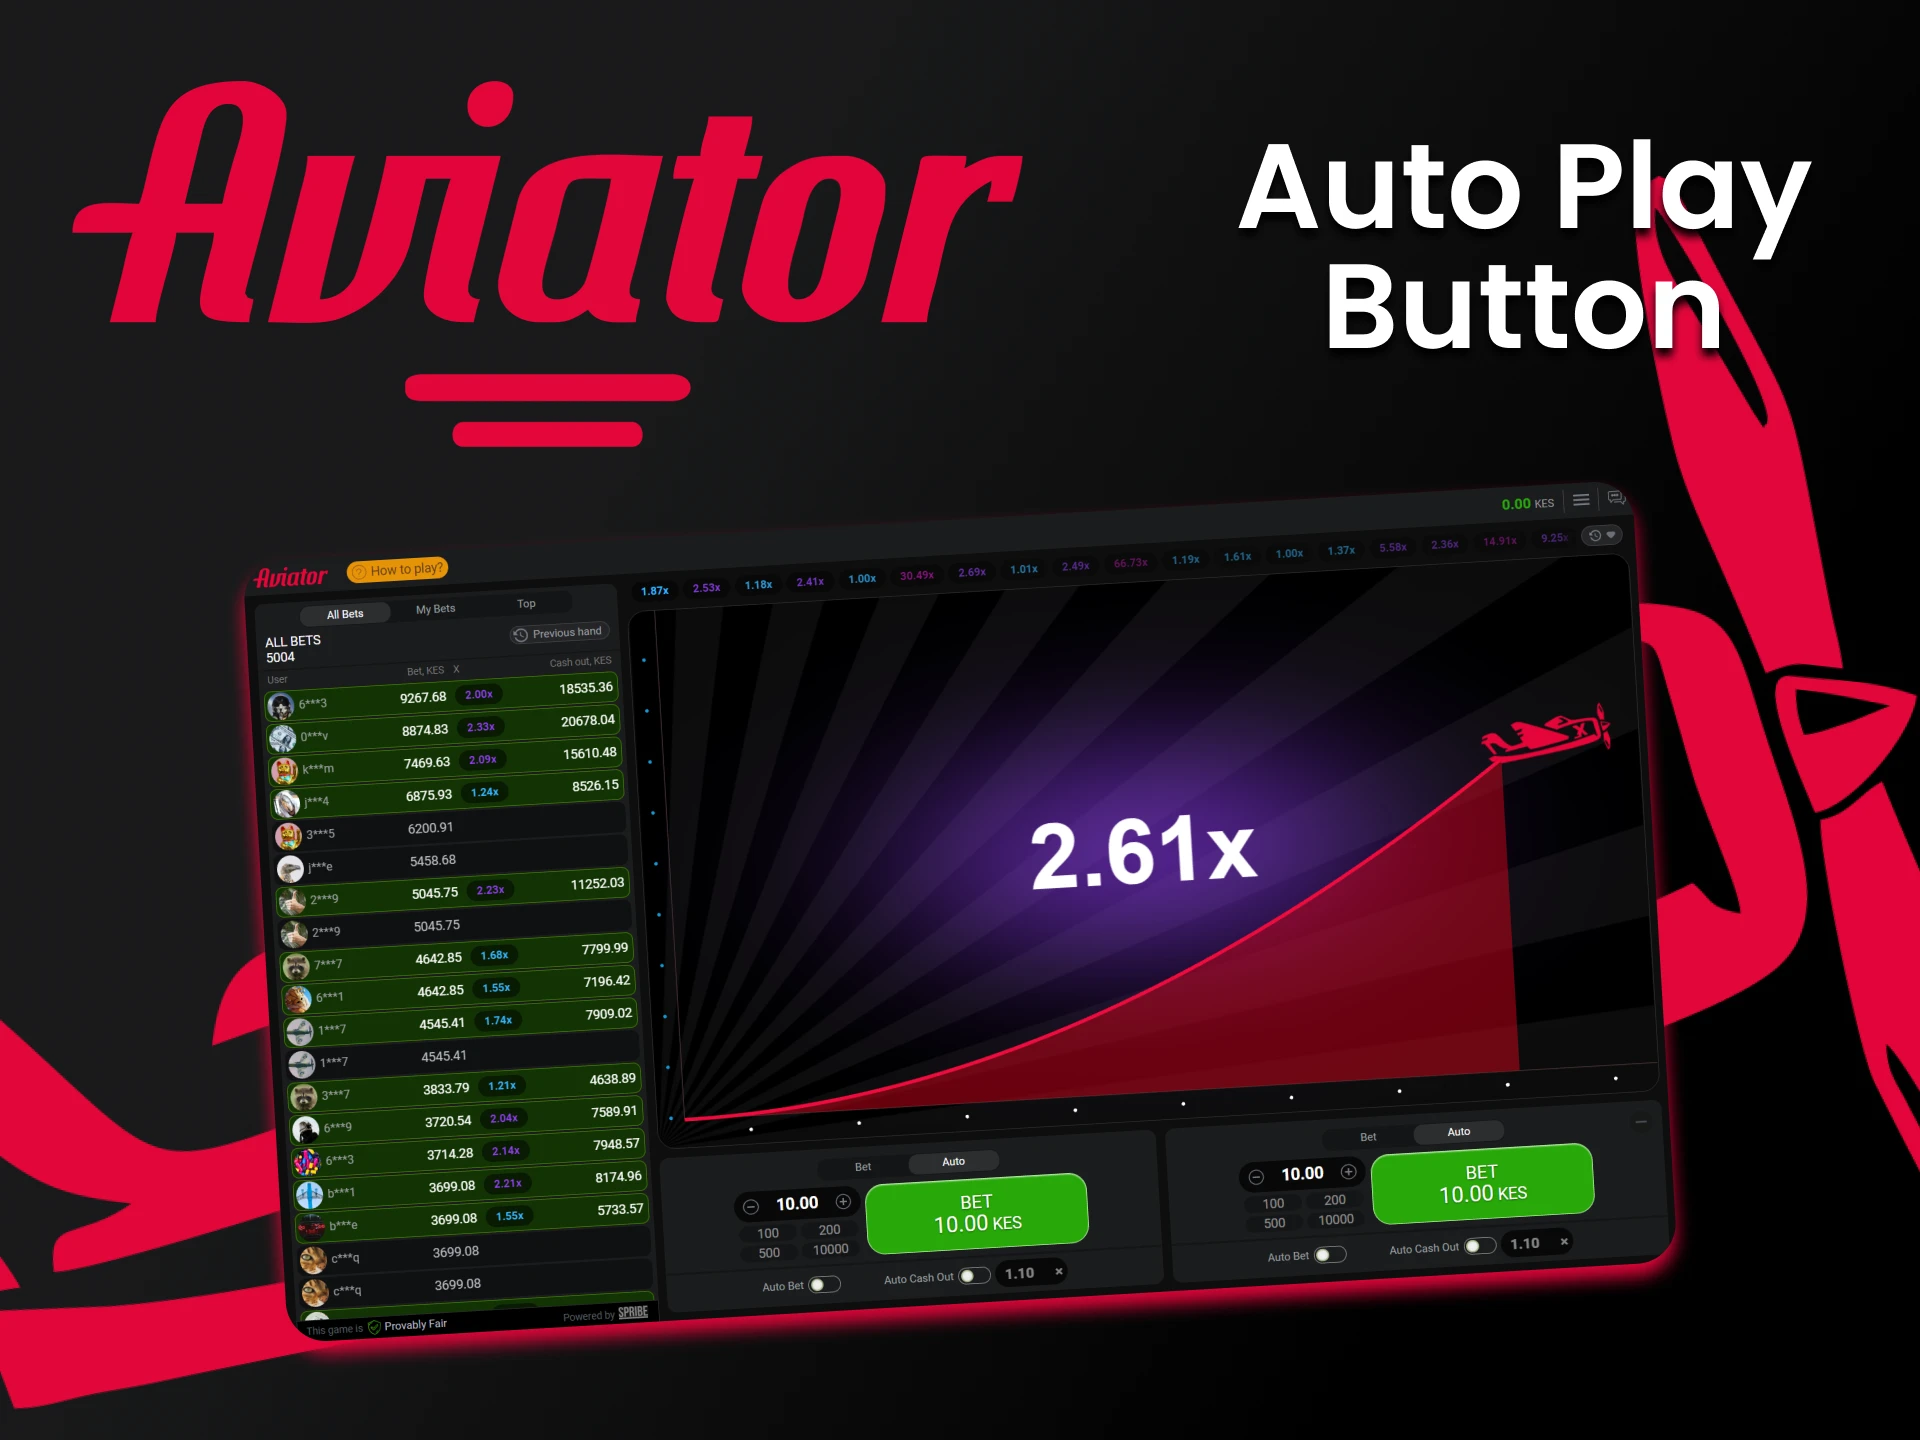 Try playing Aviator using the auto play button if you want to minimize your control over the gameplay.